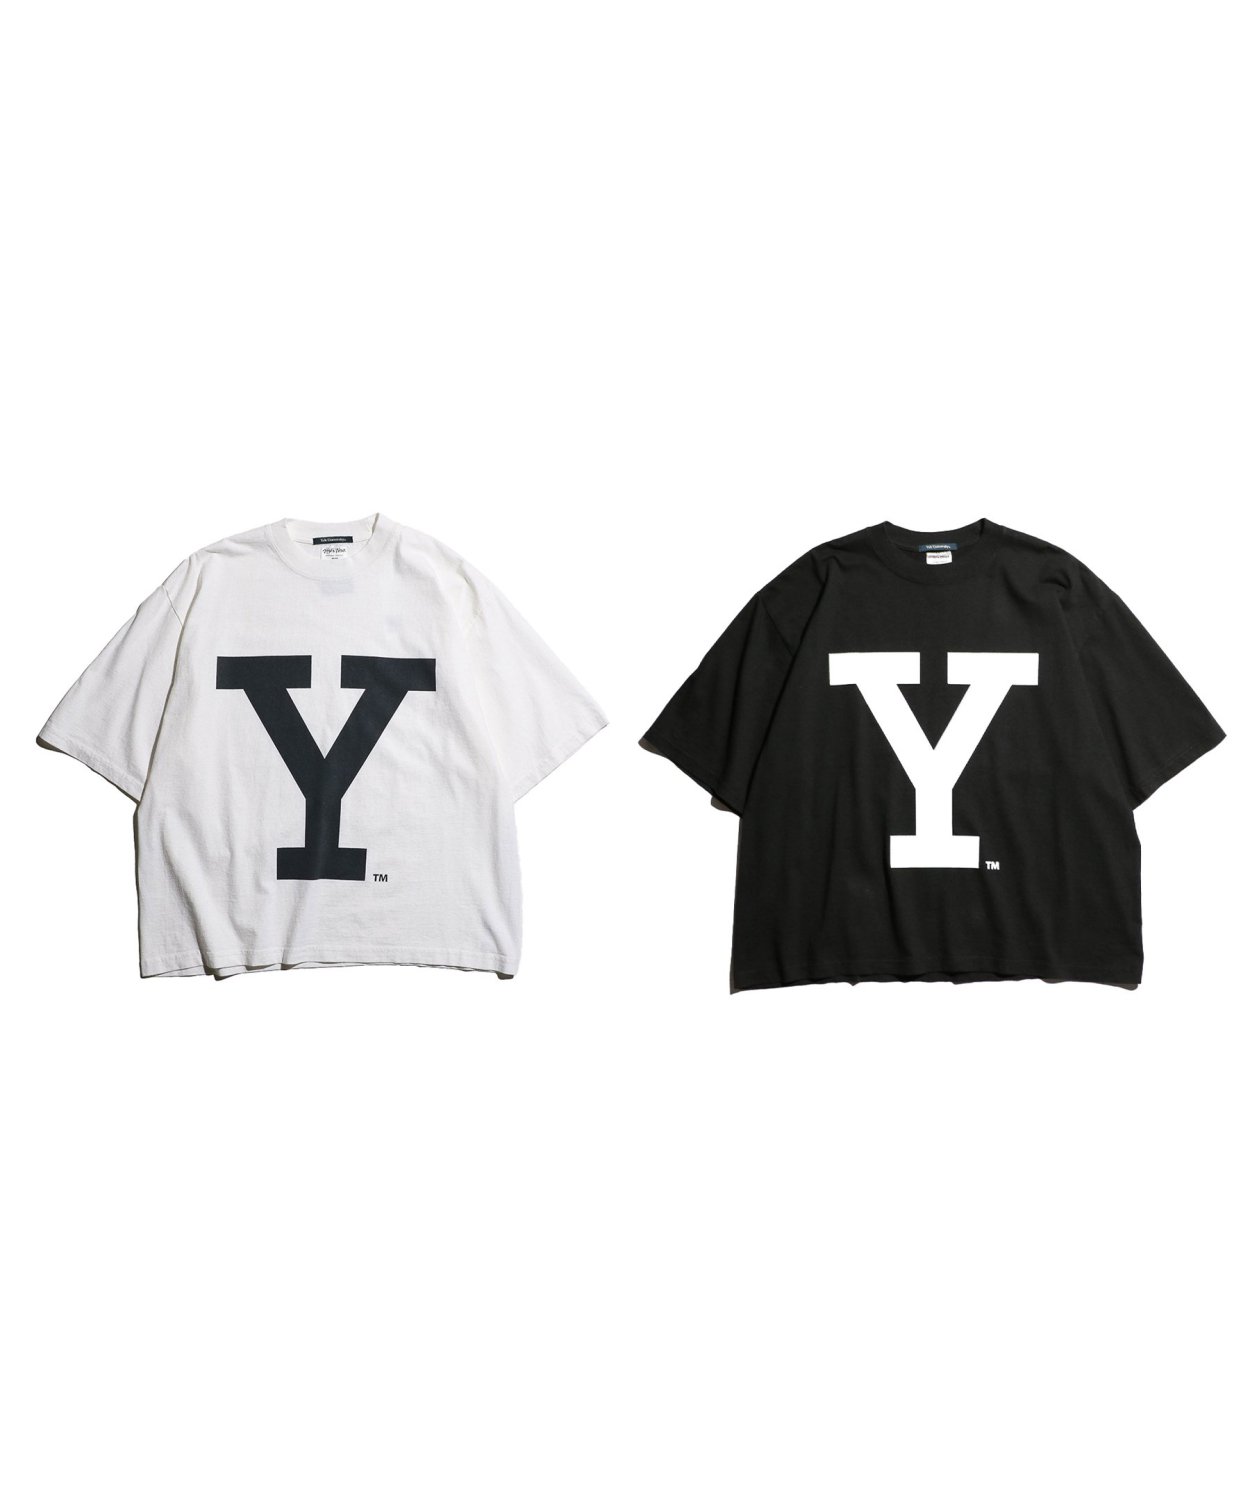 The BOOK STORE / YALE FRONT LOGO SS TEE